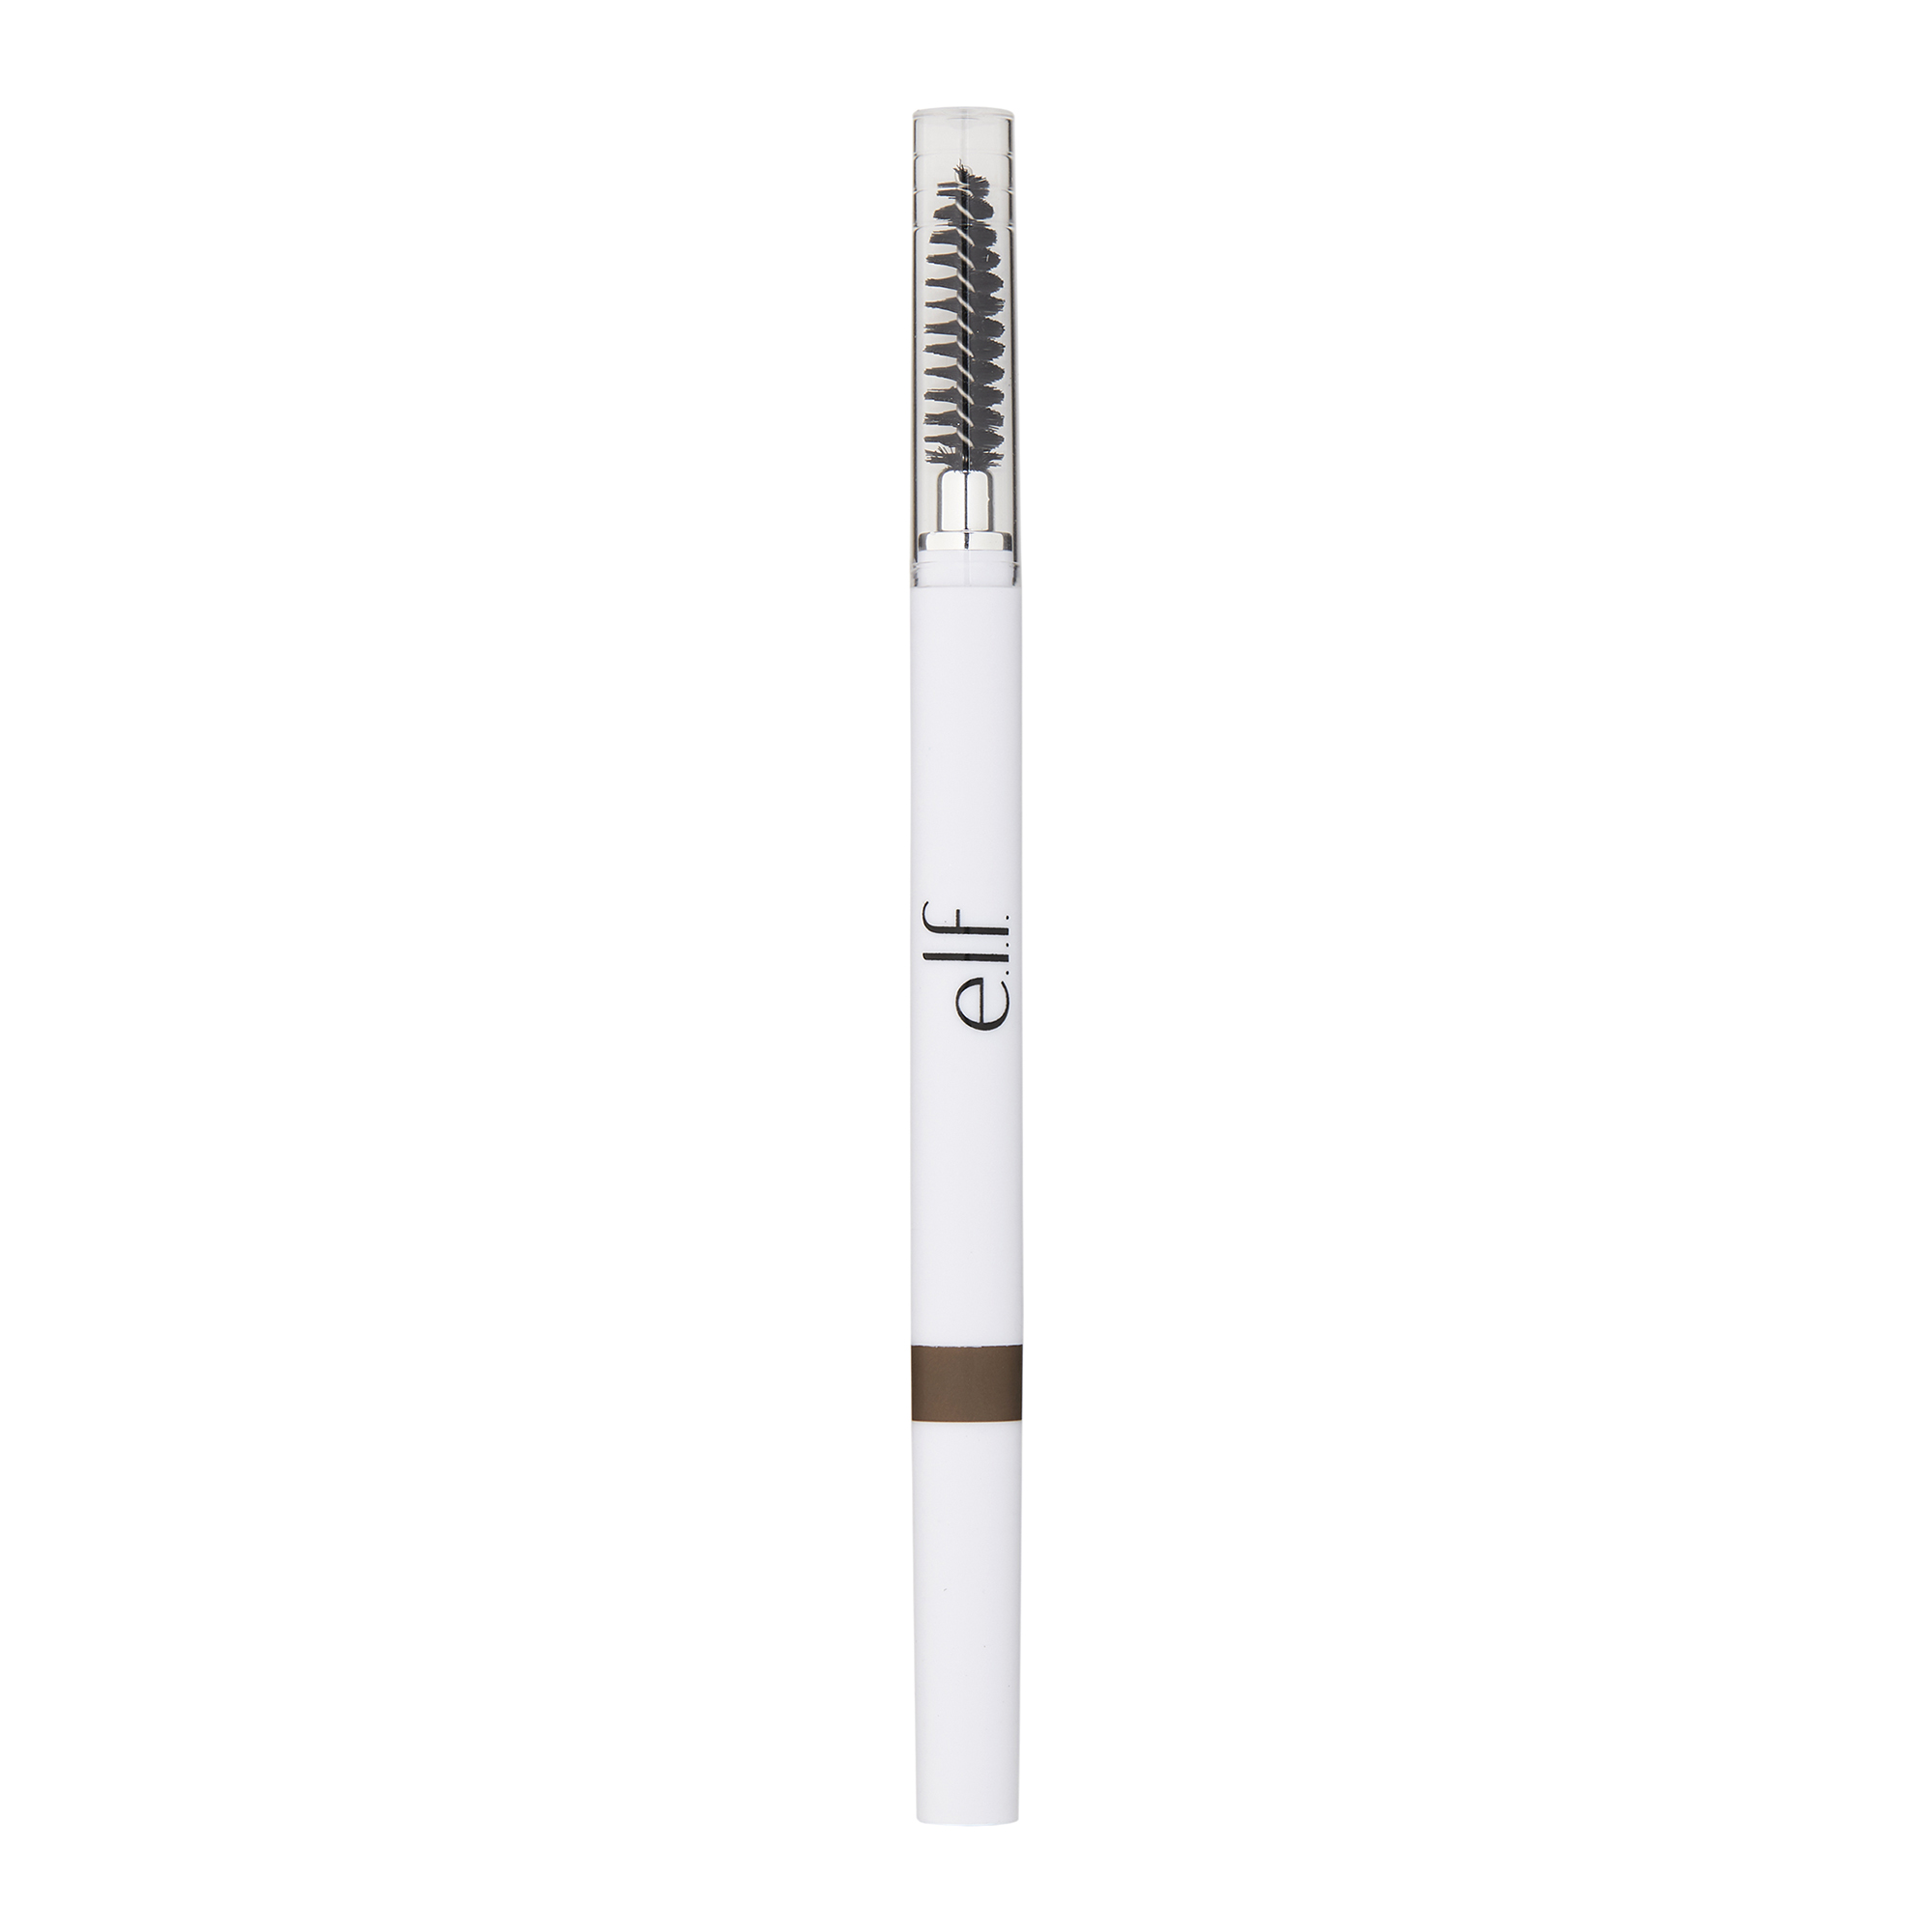 e.l.f. Instant Lift Brow Pencil, Neutral Brown - image 6 of 9